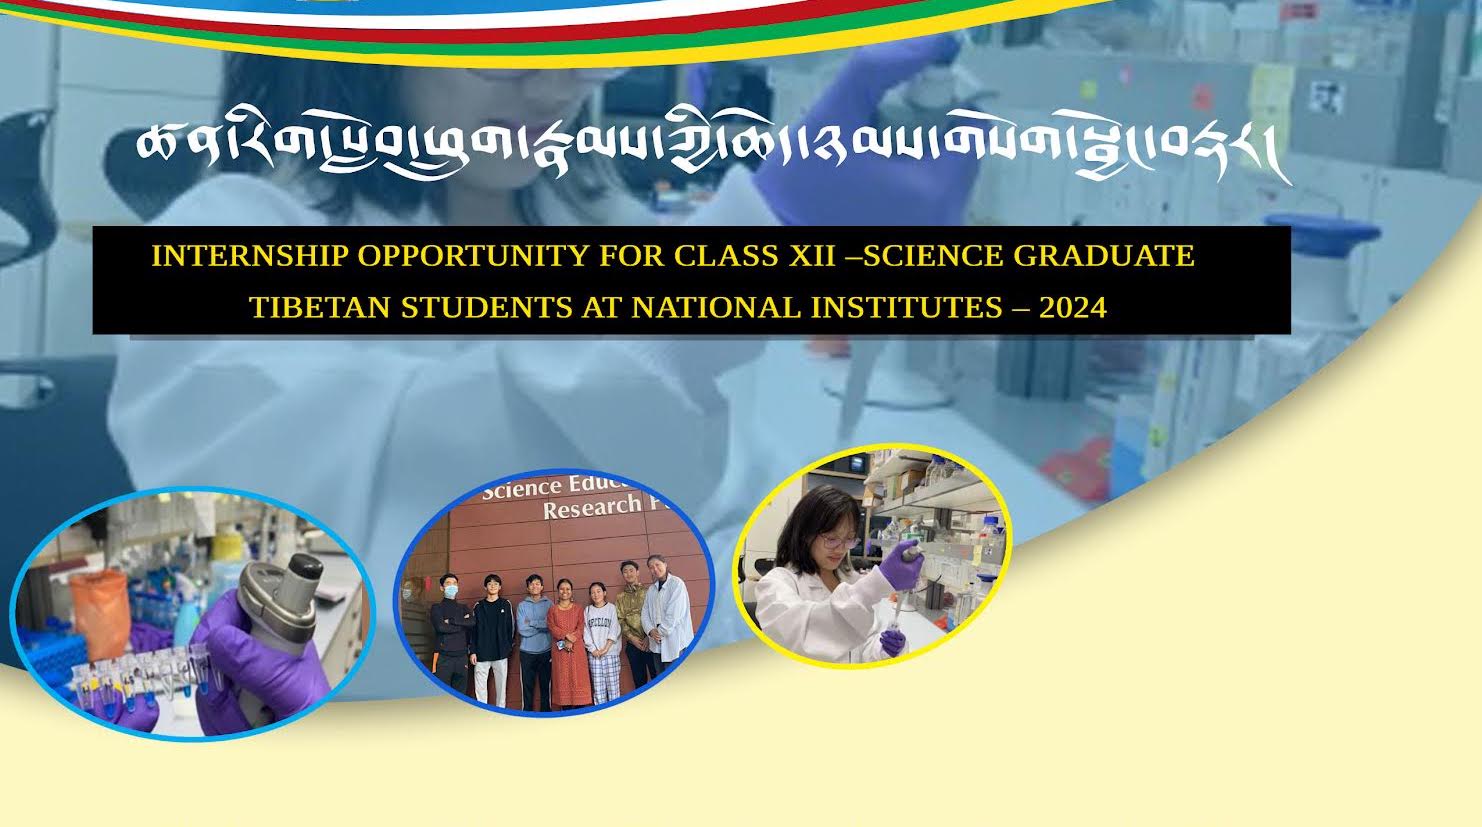 Internship Opportunity for Tibetan Class XII Science Graduates from the 2024 Batch at National Institutes